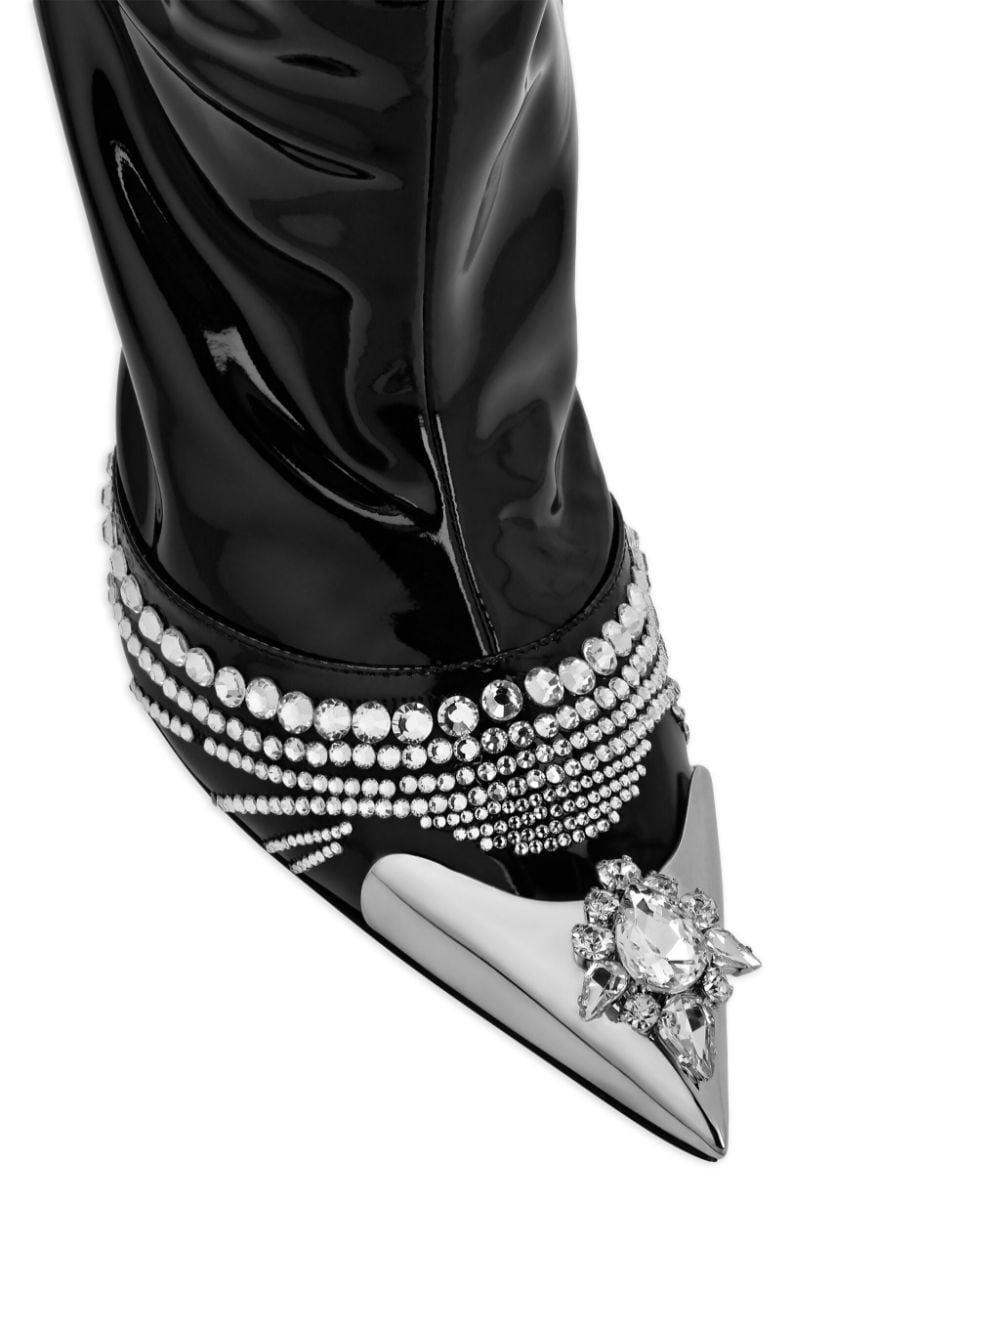 crystal-embellished patent leather boots - 4